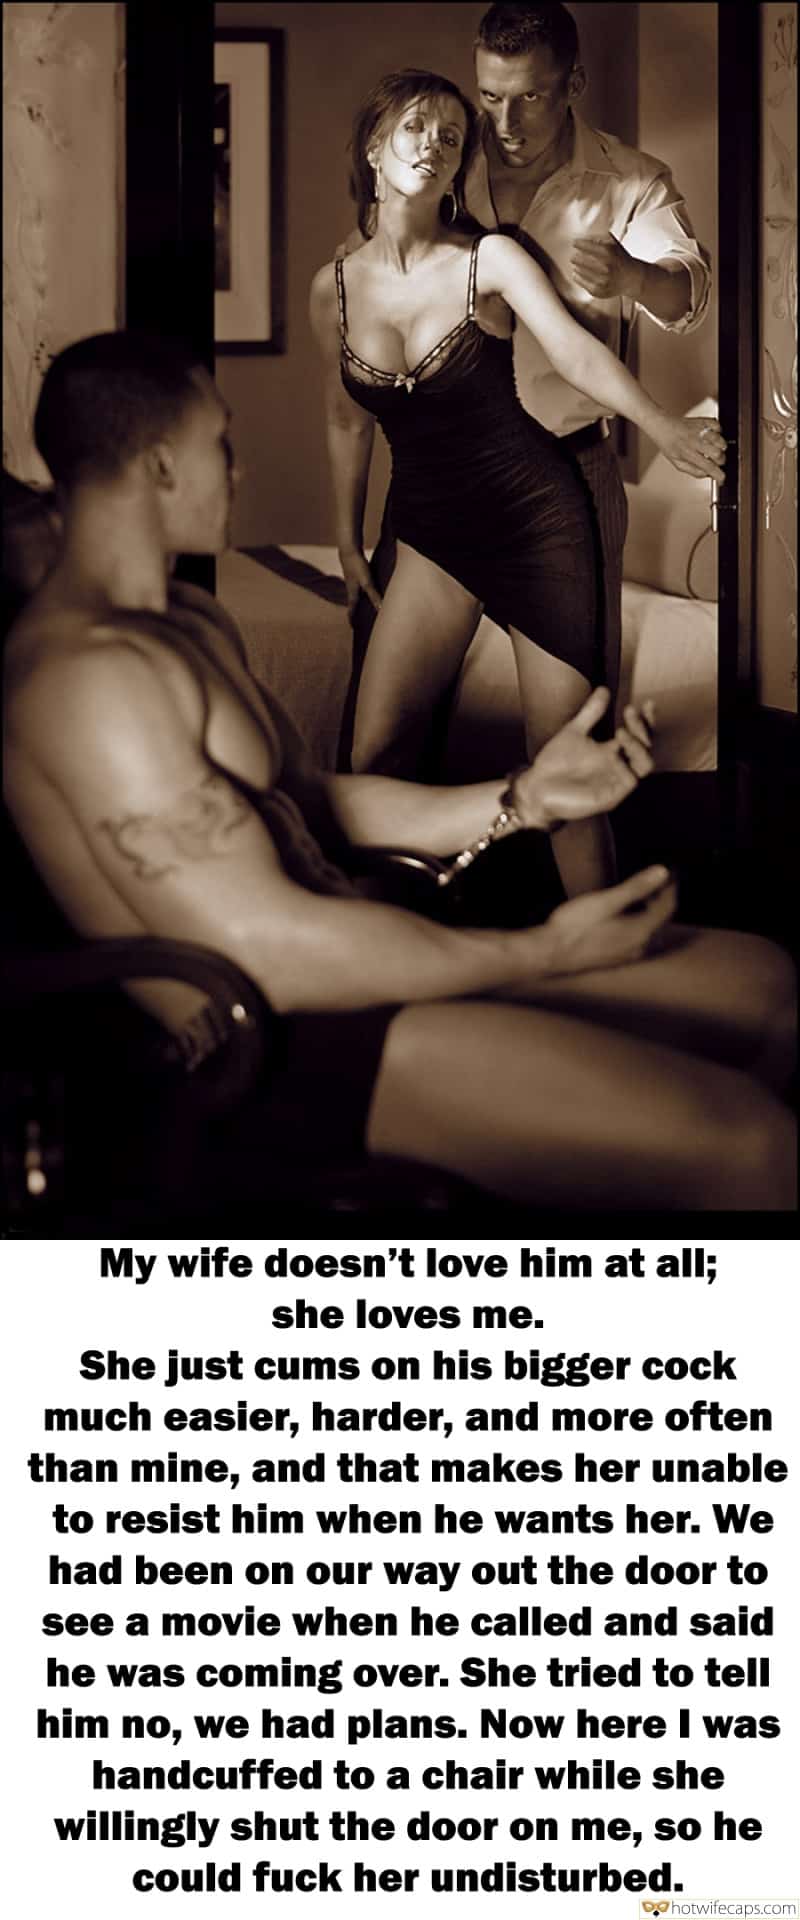 Bull Bigger Cock hotwife caption: My wife doesn’t love him at all; she loves me. She just cums on his bigger cock much easier, harder, and more often than mine, and that makes her unable to resist him when he wants her. We had been...